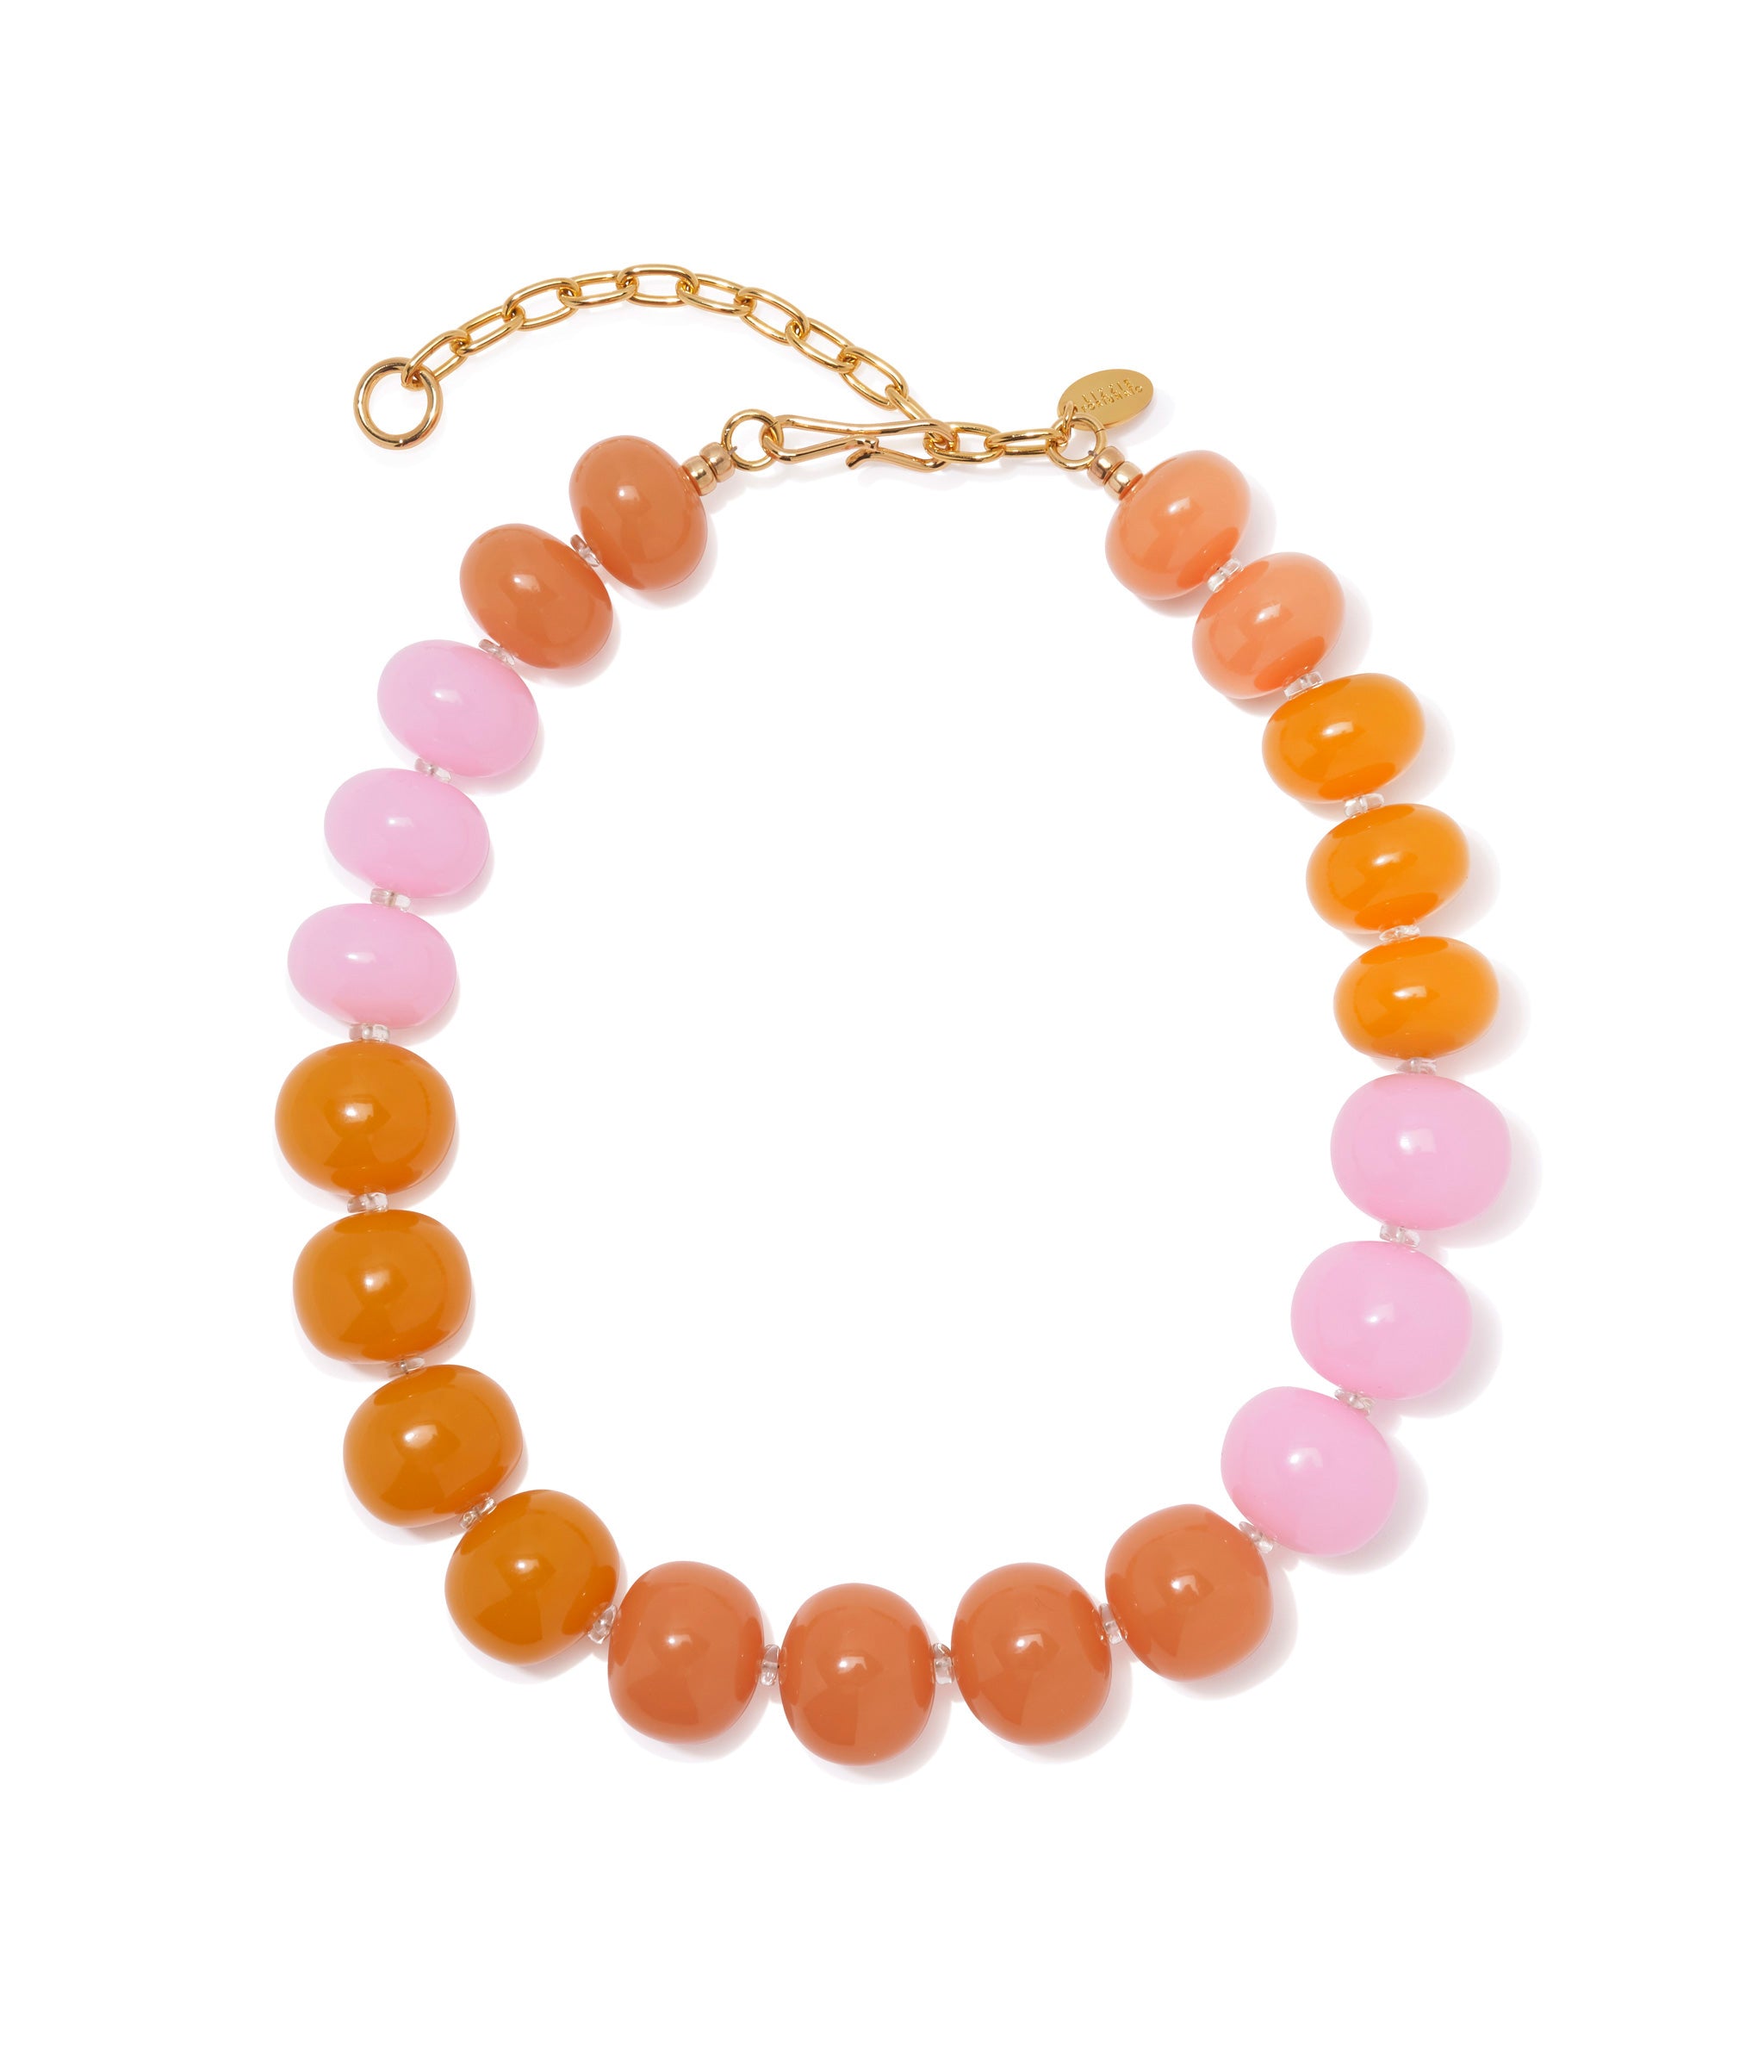 Olympia Collar. Necklace with orange-pink various resin beads with opal accent beads and gold-placed brass hook closure.